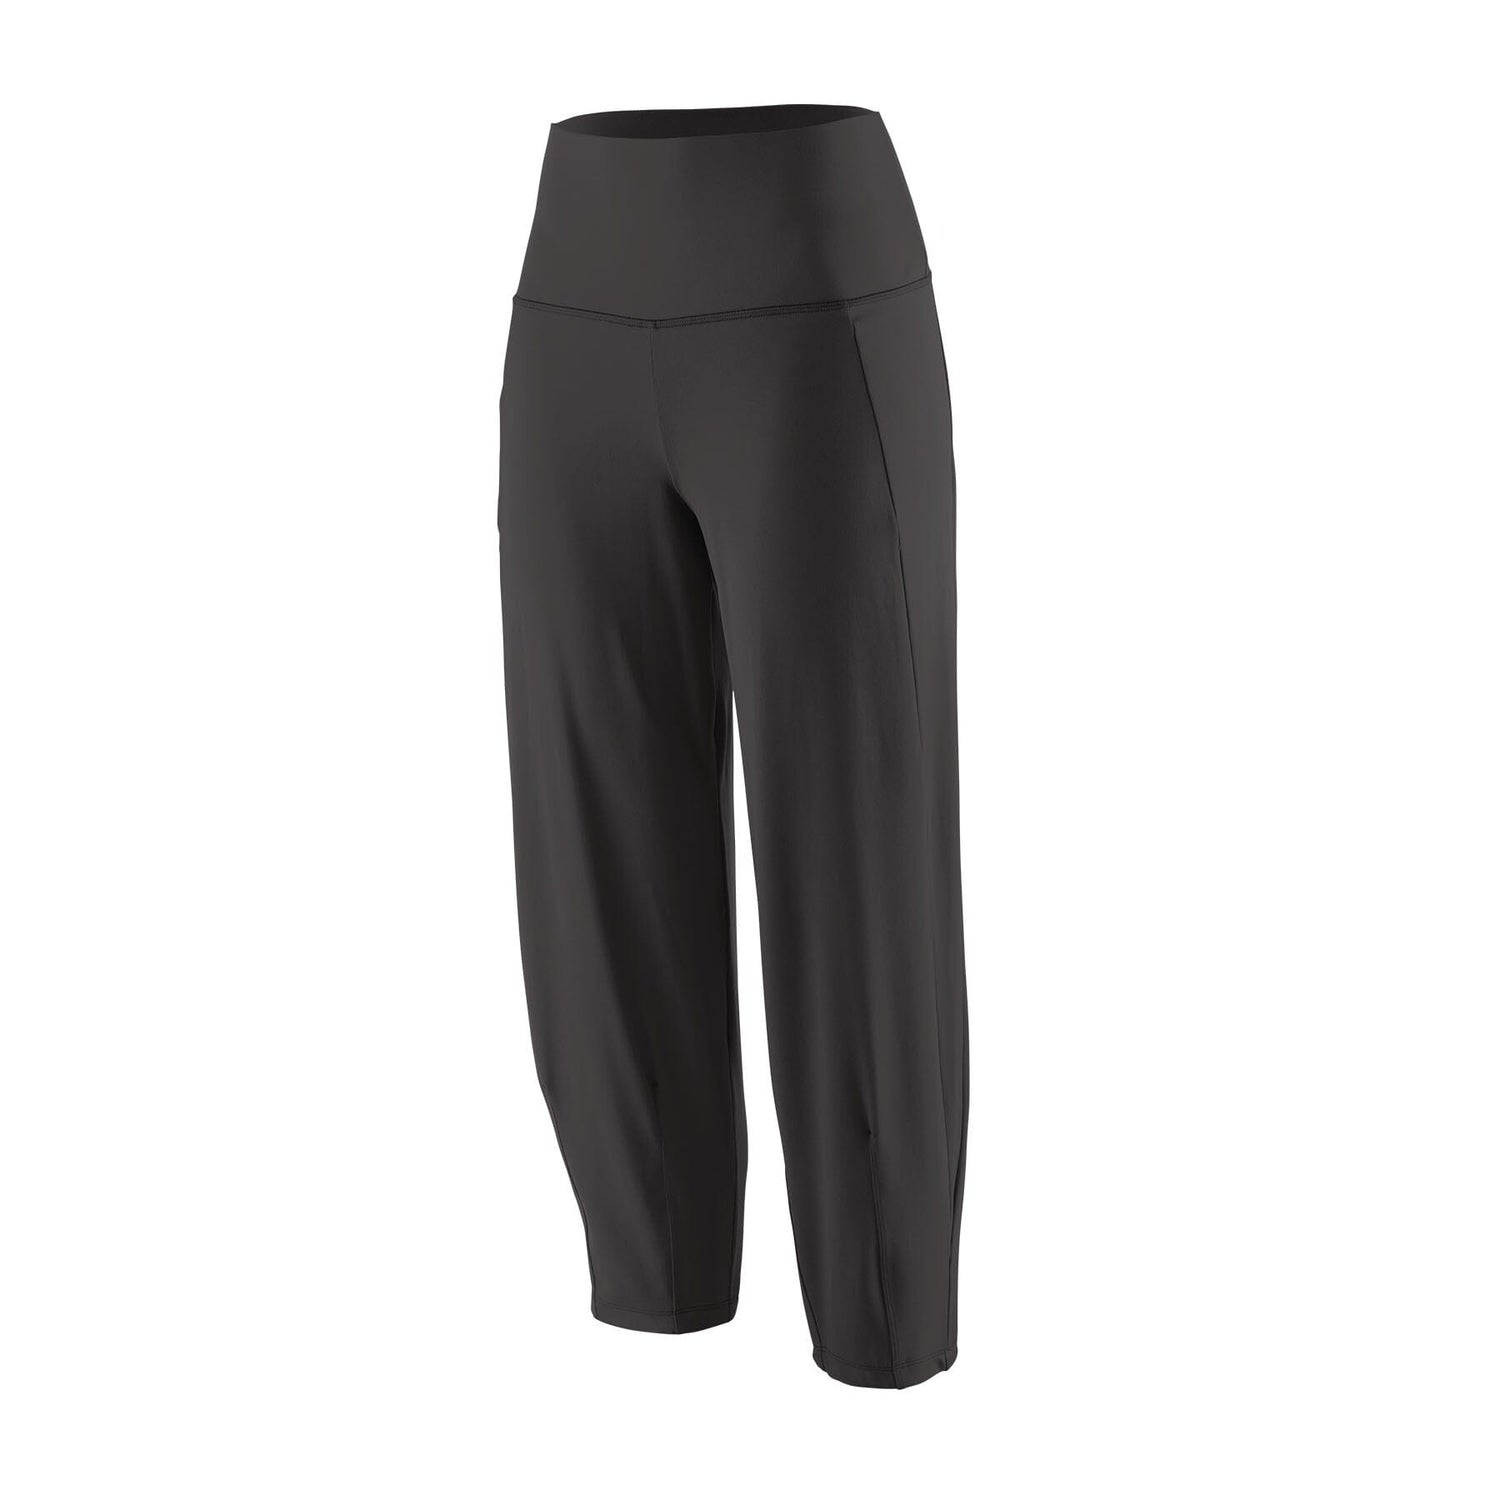 Patagonia W's Maipo Rock Crops - Recycled Nylon Black Pants